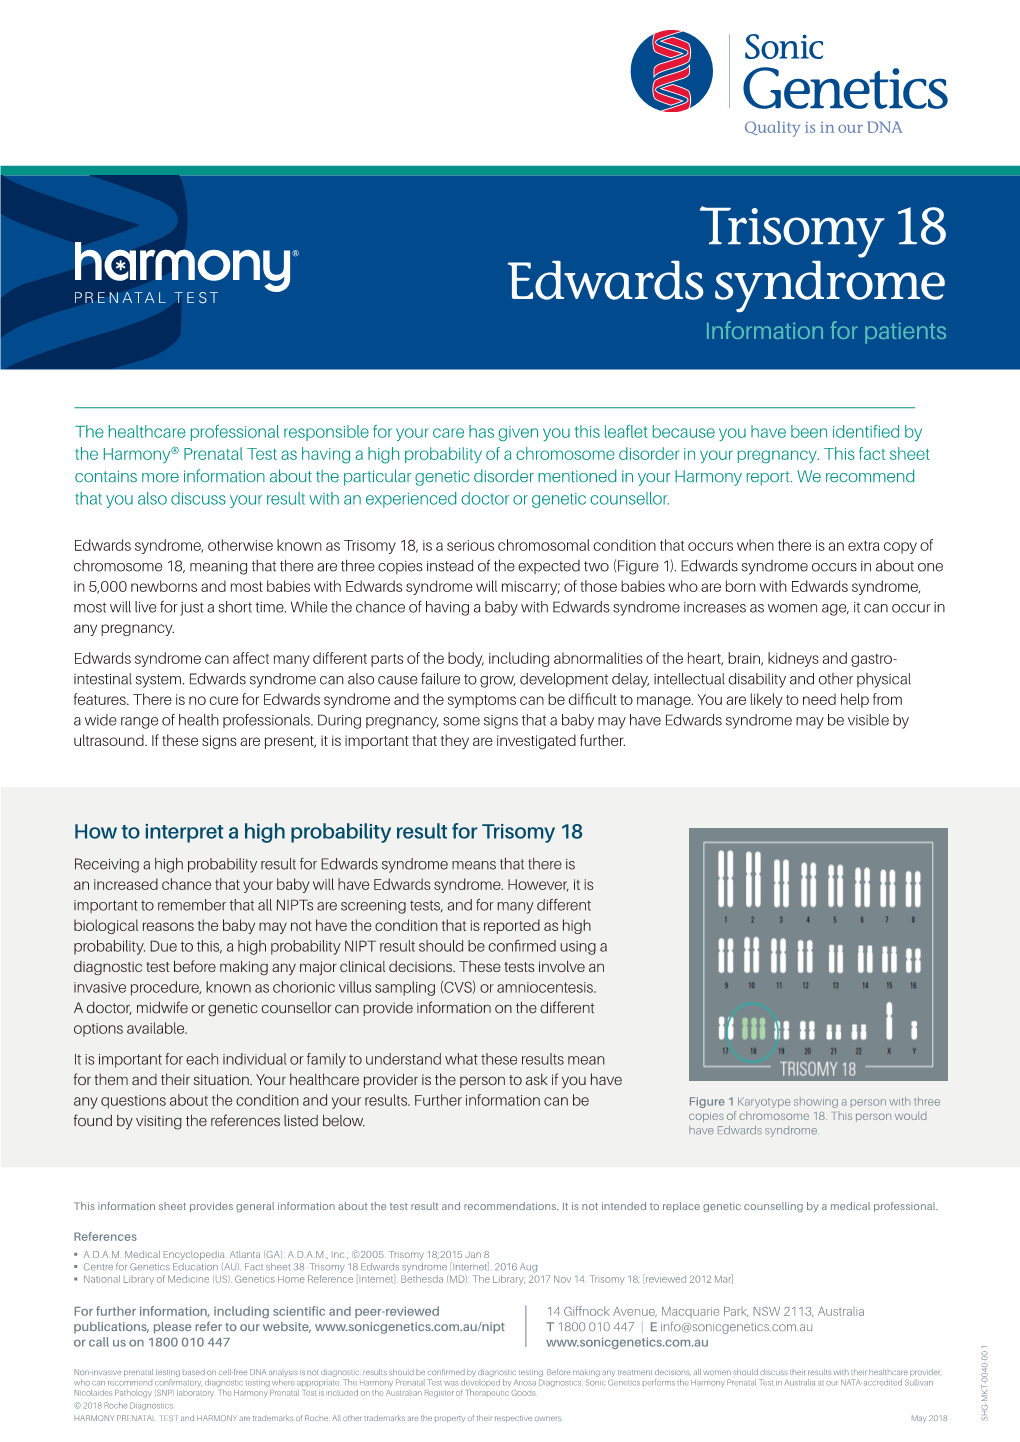 Trisomy 18 Edwards Syndrome Information for Patients